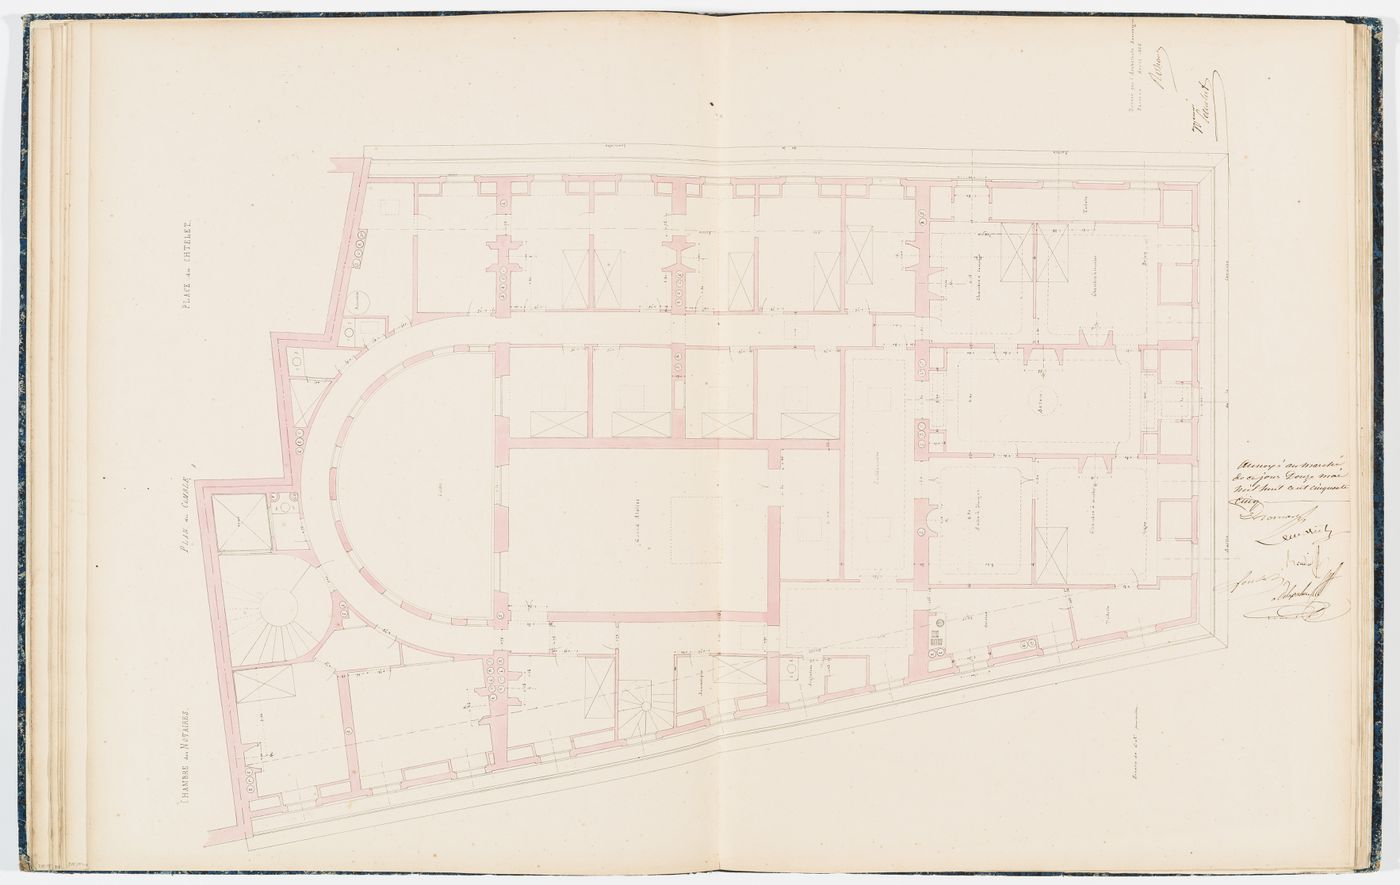 Contract drawing for the Chambre des Notaires: Plan for the "étage sous le comble"